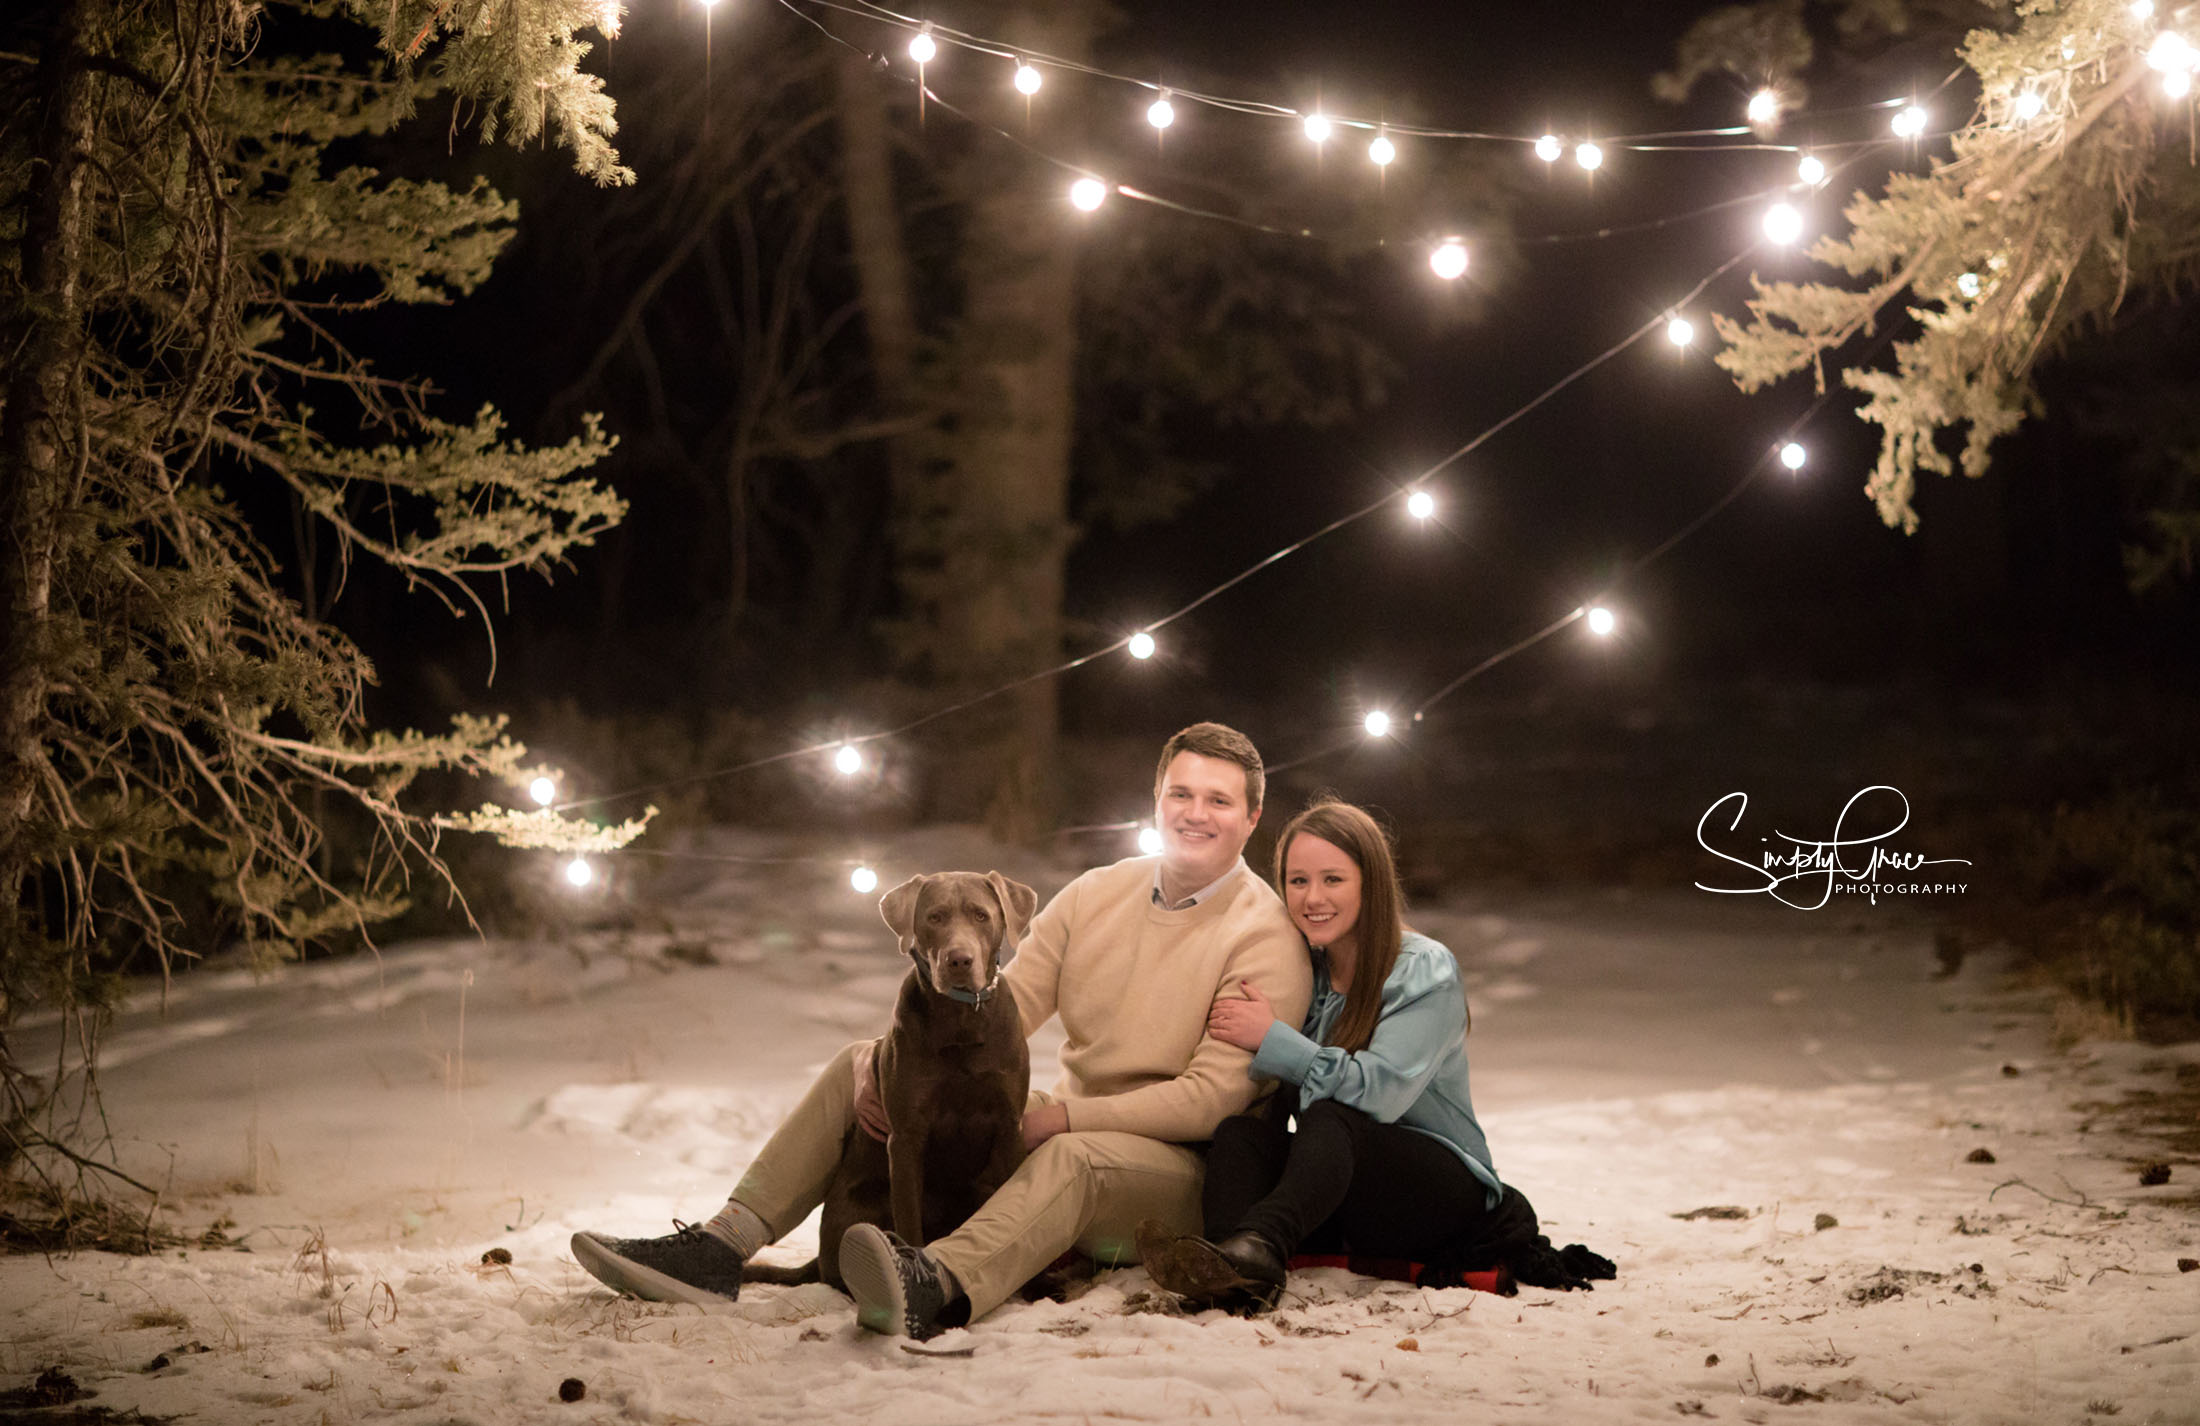 family photo with dog at night in woodland park colroado